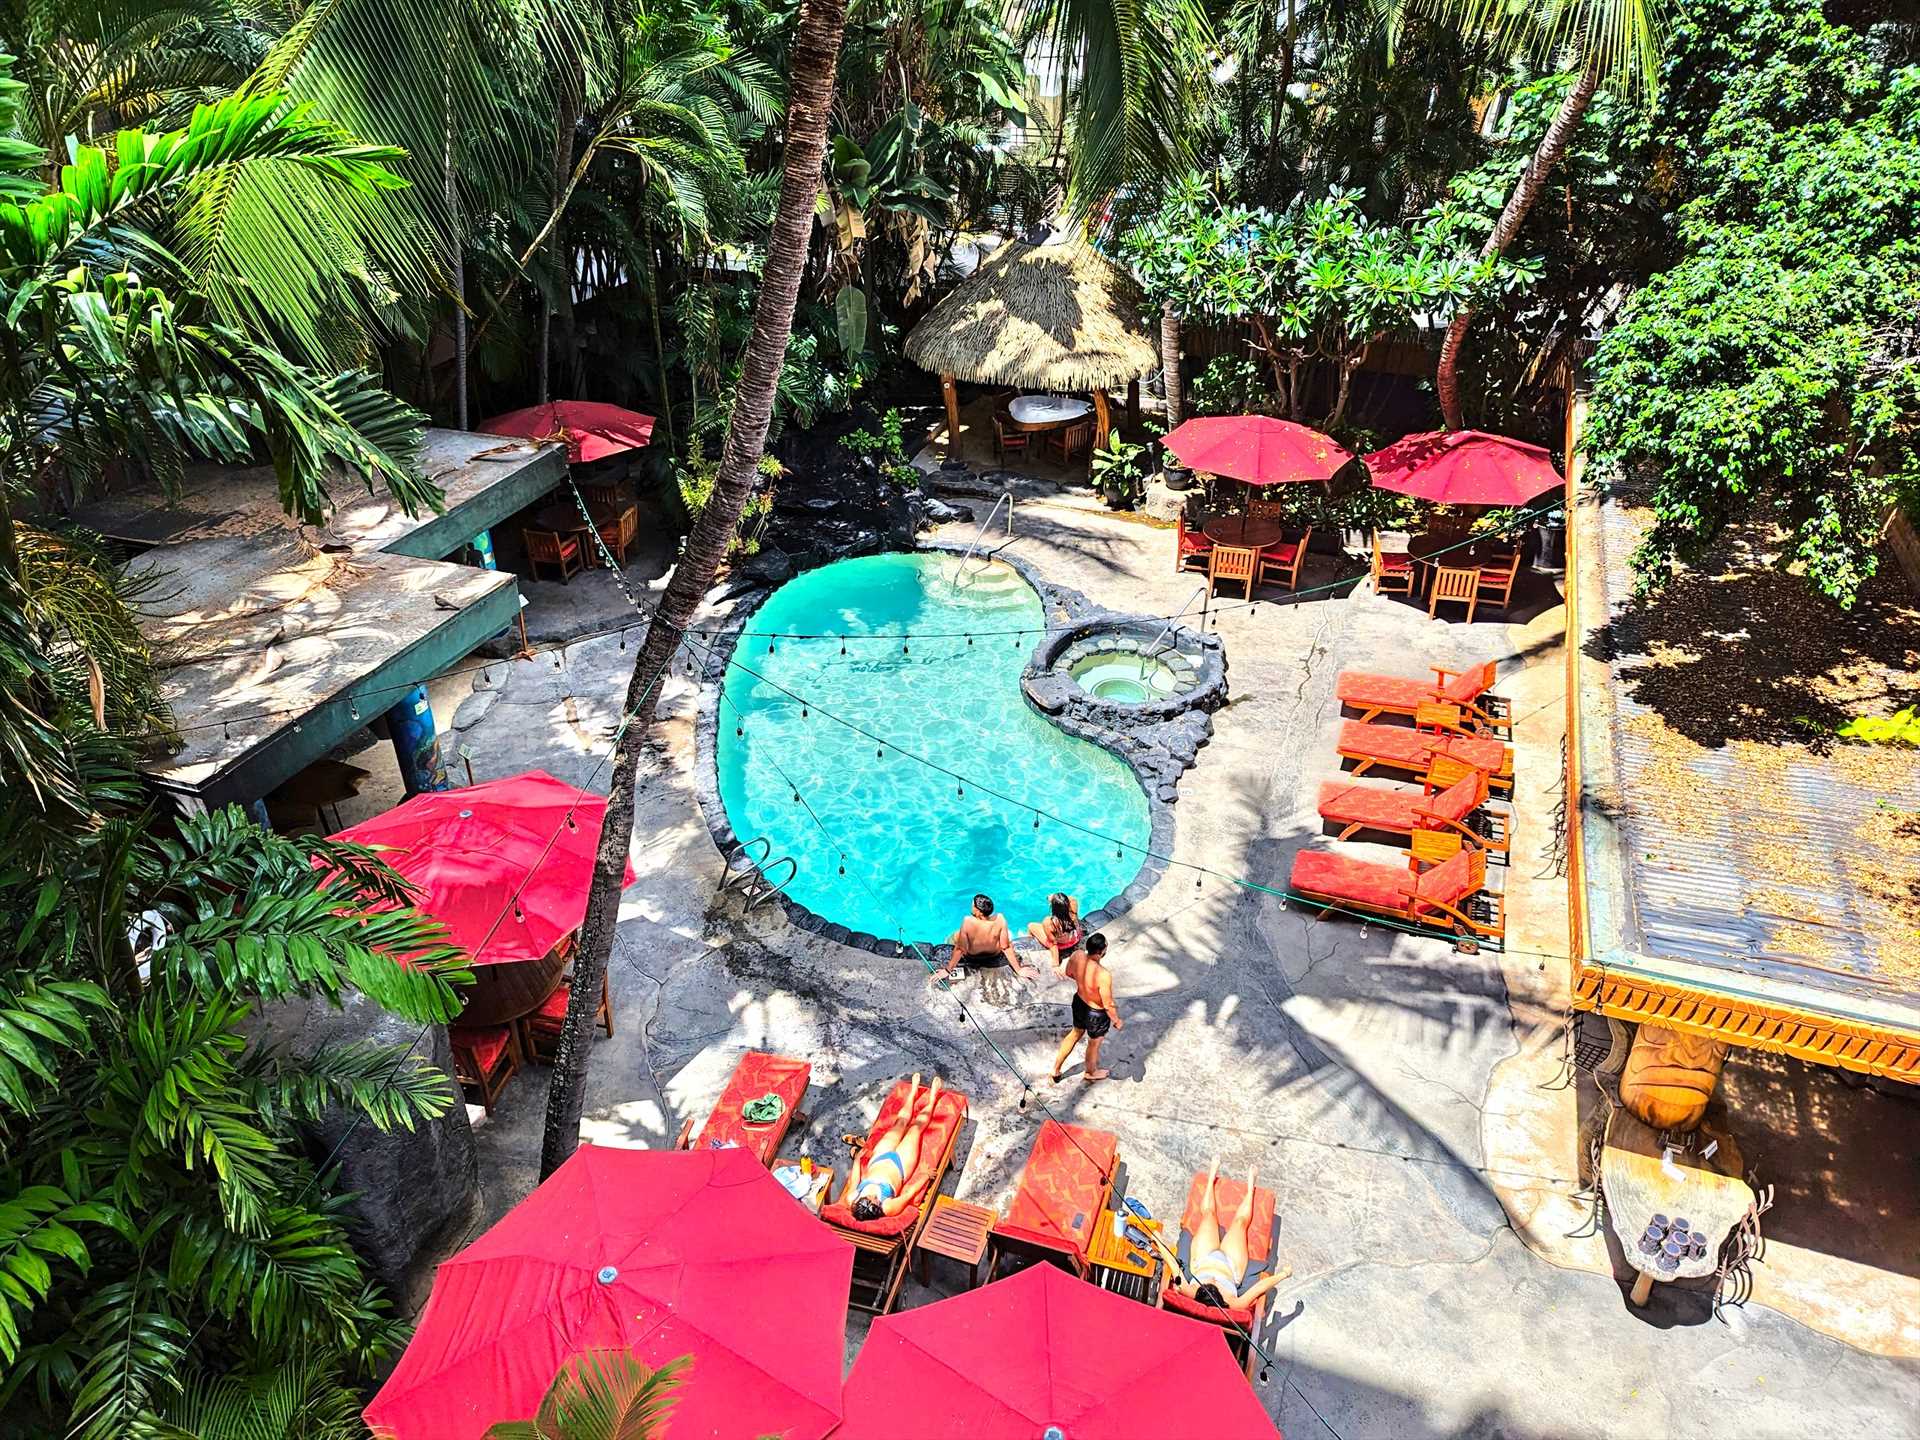 The Bamboo is a charming, boutique resort with lots of ameni